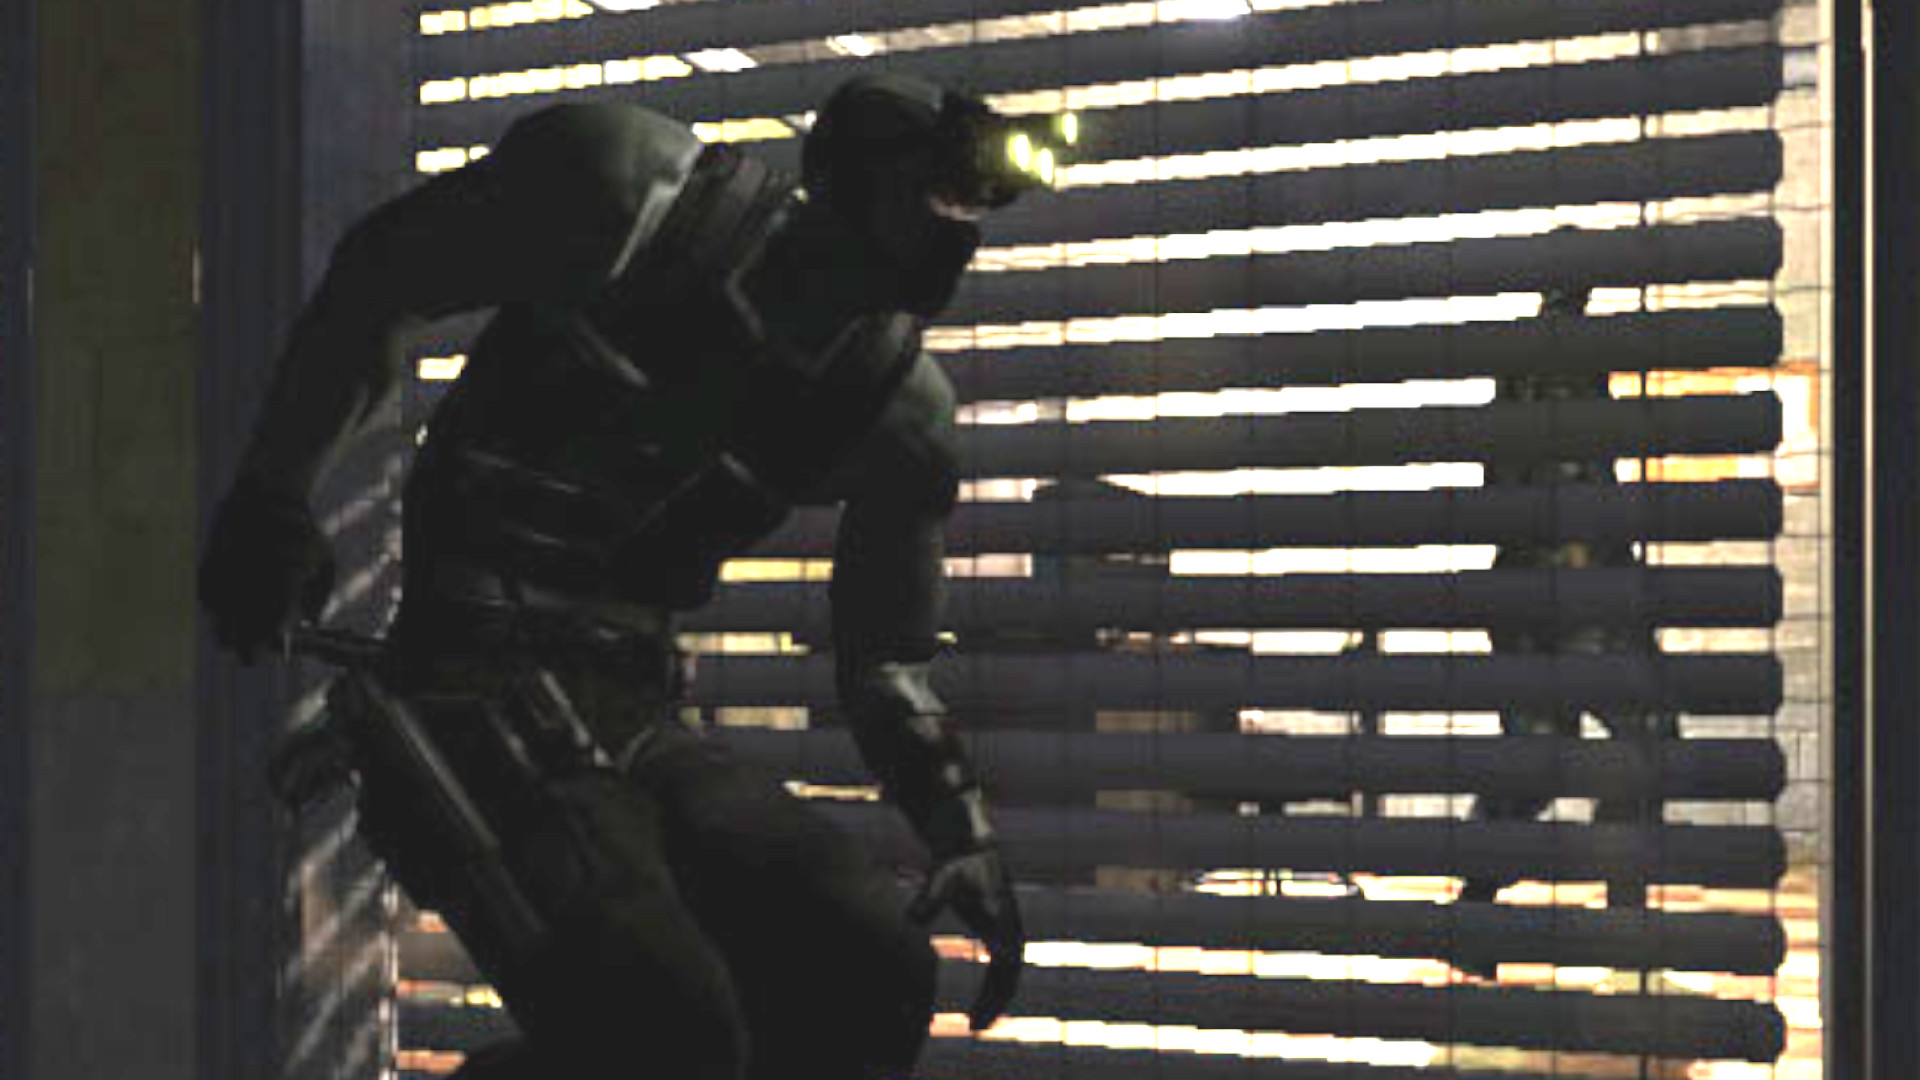 Get Splinter Cell: Chaos Theory for free while the offer lasts